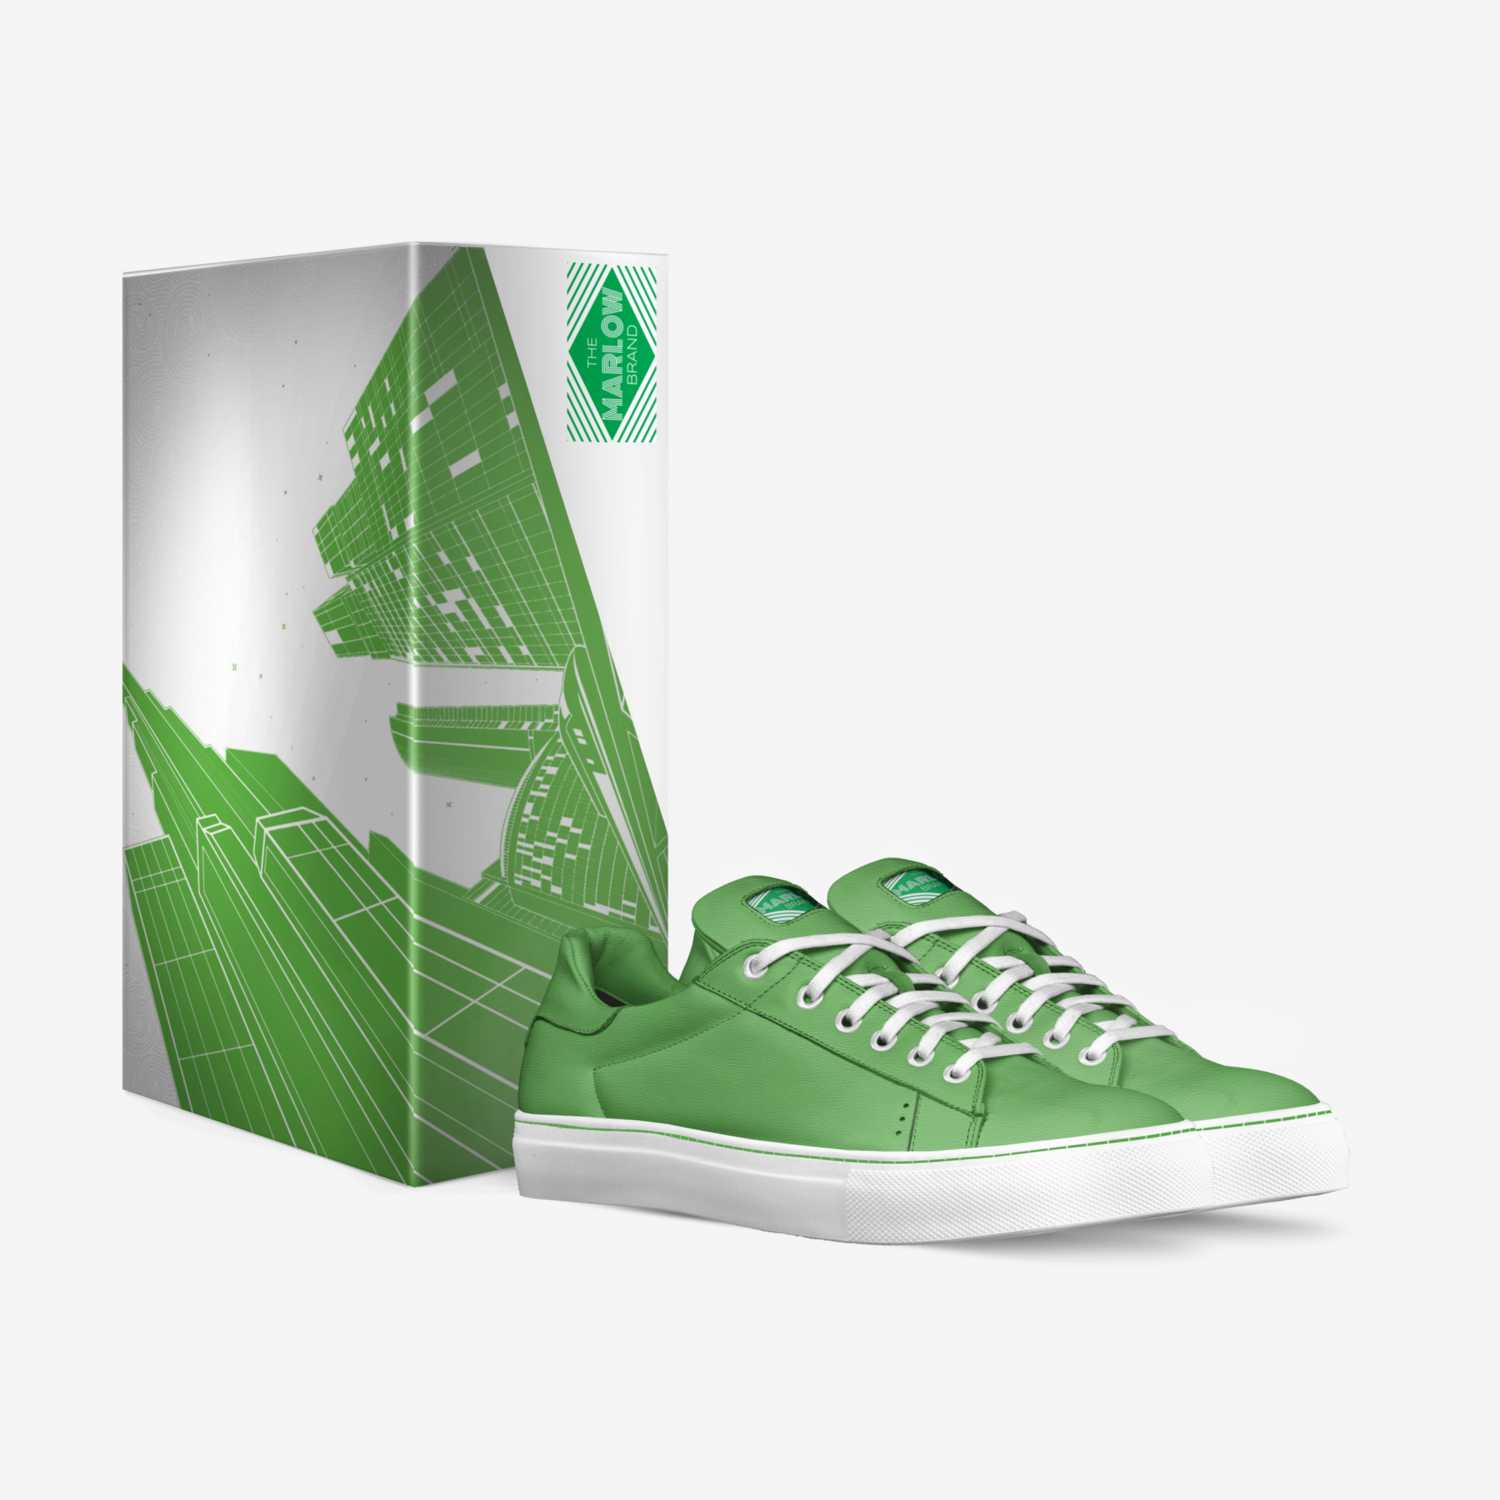 Maple Lane (Green) custom made in Italy shoes by The Marlow Brand | Box view